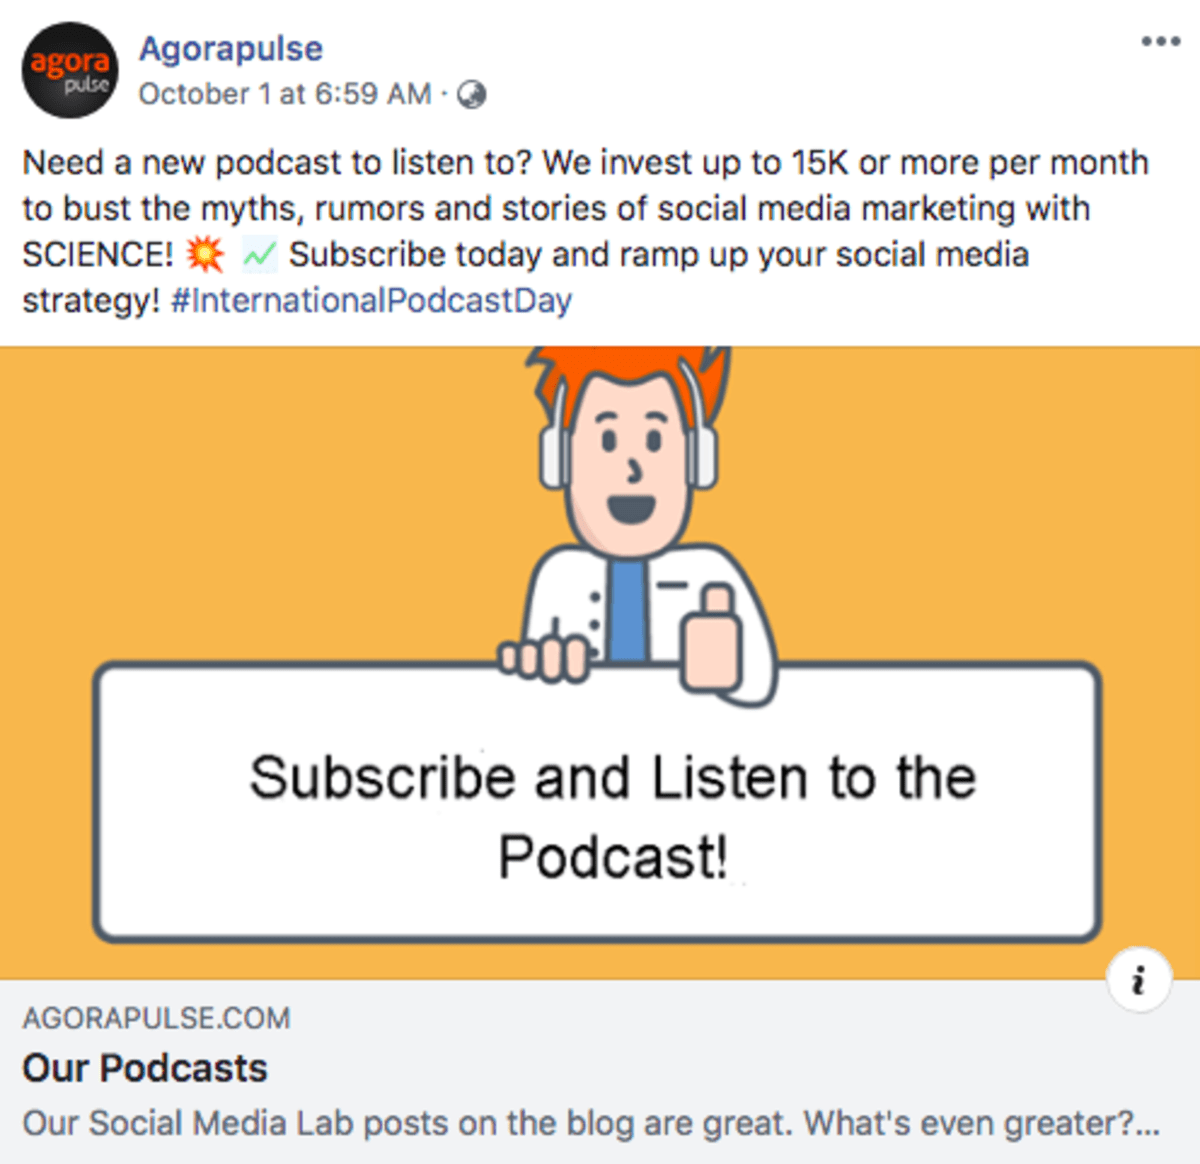 Agorapulse promoting its podcast on Facebook